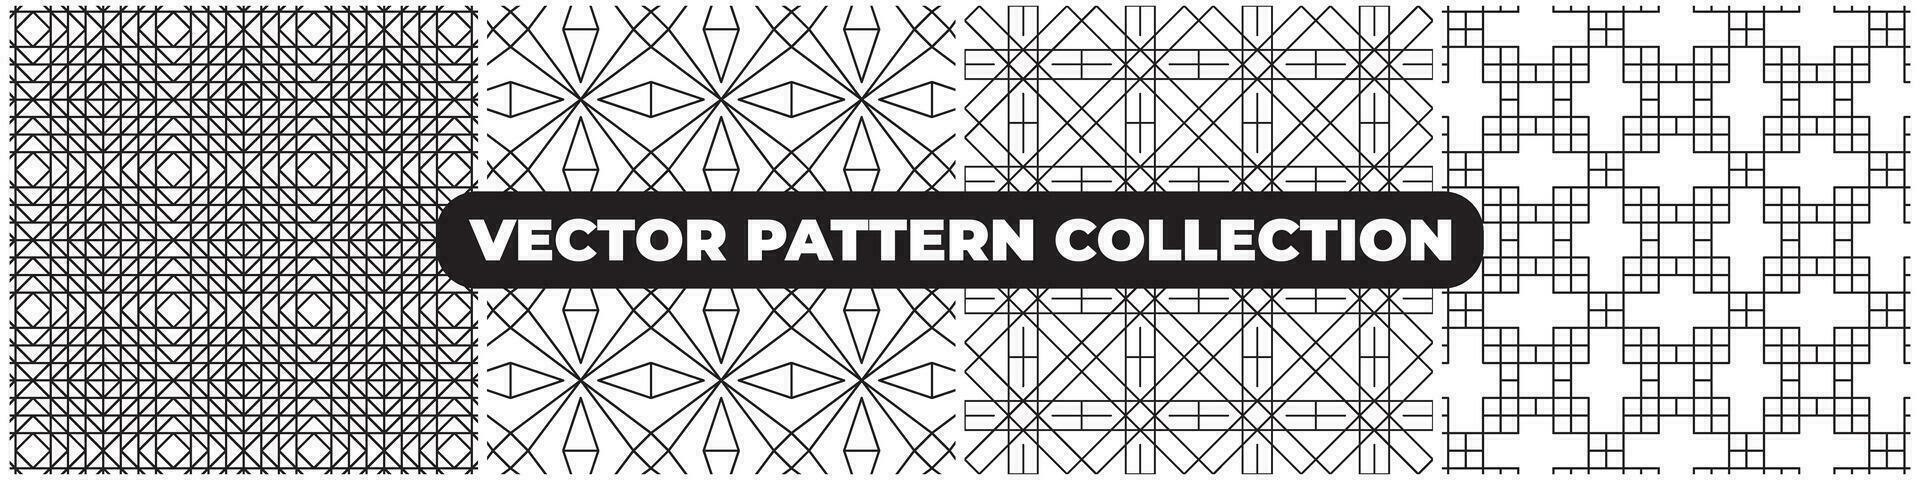 vector pattern collection